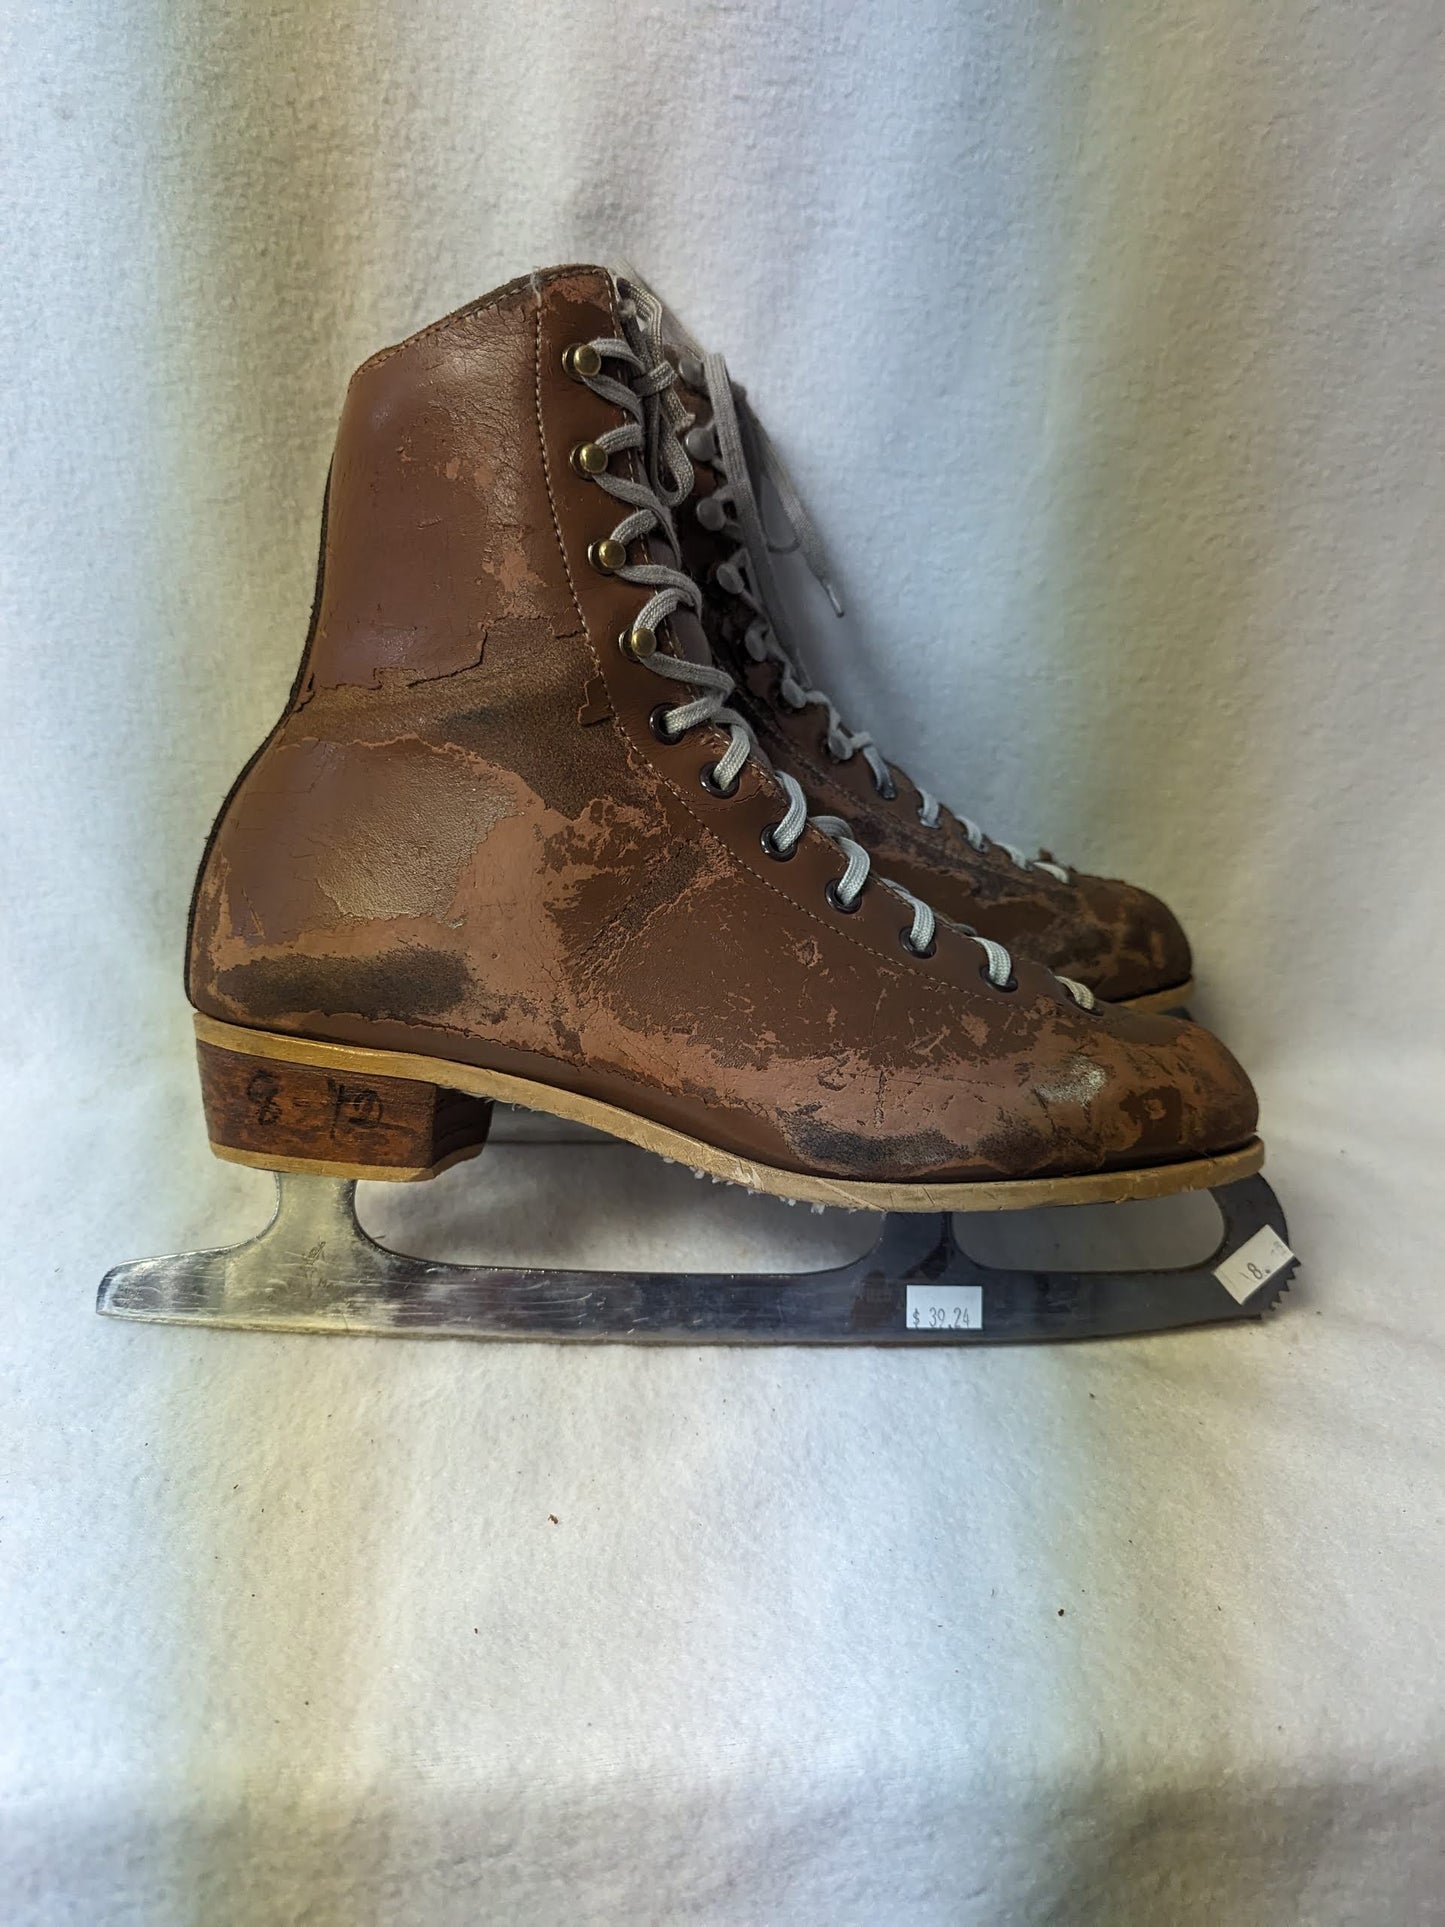 Rink Master Ice Skates Size 8 Color Brown Condition Used